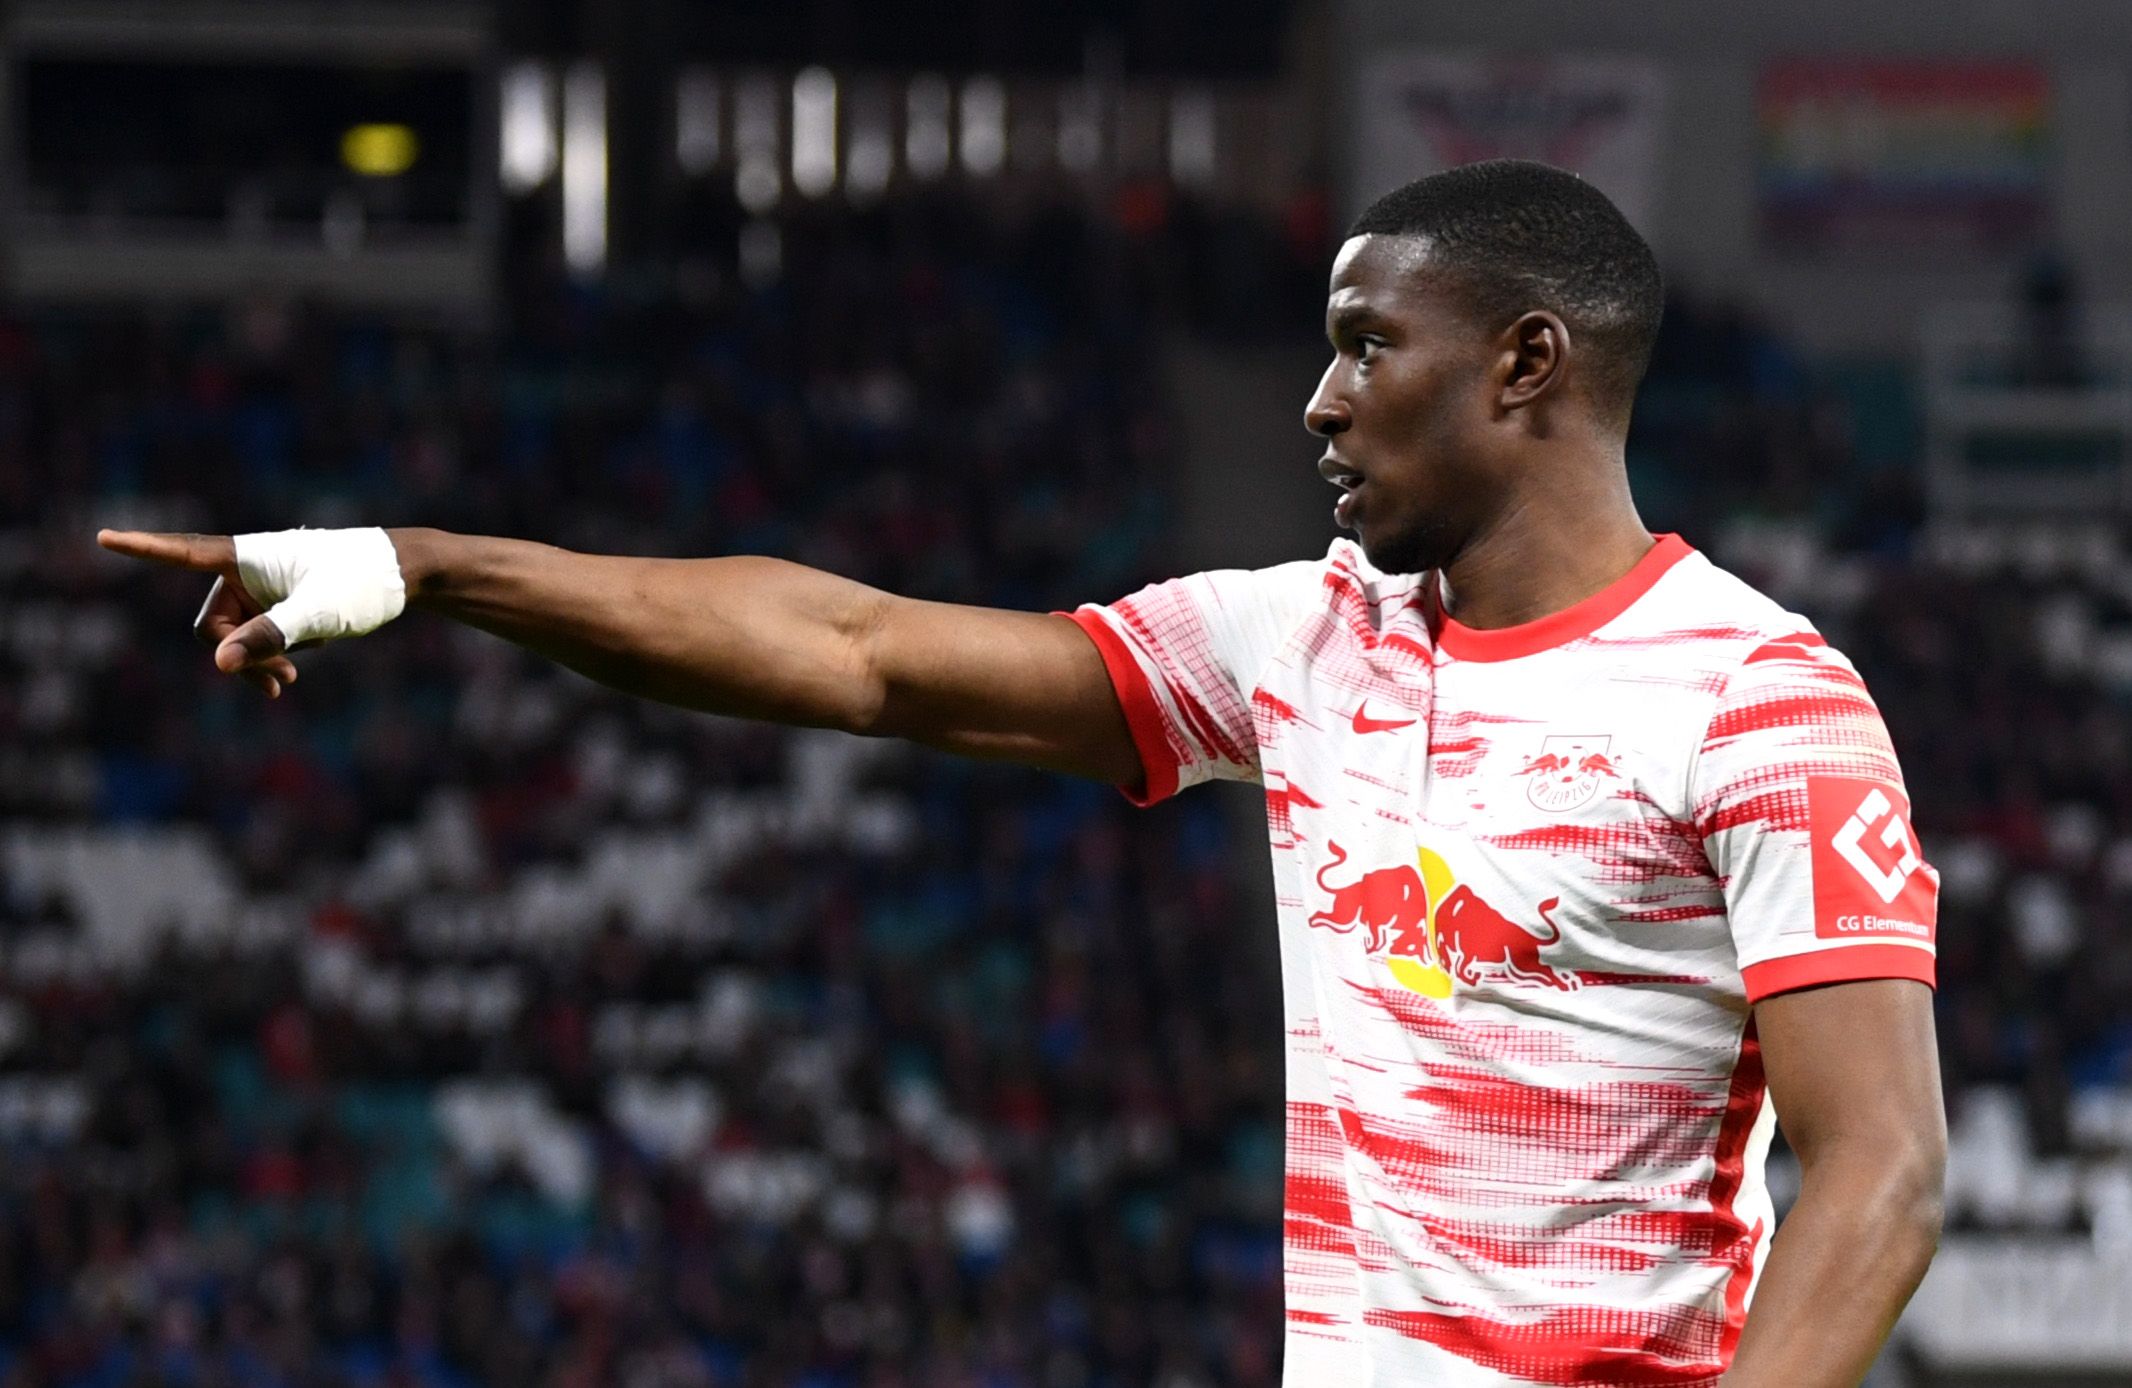 
nordi-mukiele-rb-leipzig-premier-league-manchester-united-transfer-news-ralf-rangnick-target-red-bull-ten-hag-1.jpgSoccer Football - Bundesliga - RB Leipzig v TSG 1899 Hoffenheim - Red Bull Arena, Leipzig, Germany - April 10, 2022  RB Leipzig's Nordi Mukiele REUTERS/Annegret Hilse DFL REGULATIONS PROHIBIT ANY USE OF PHOTOGRAPHS AS IMAGE SEQUENCES AND/OR QUASI-VIDEO.